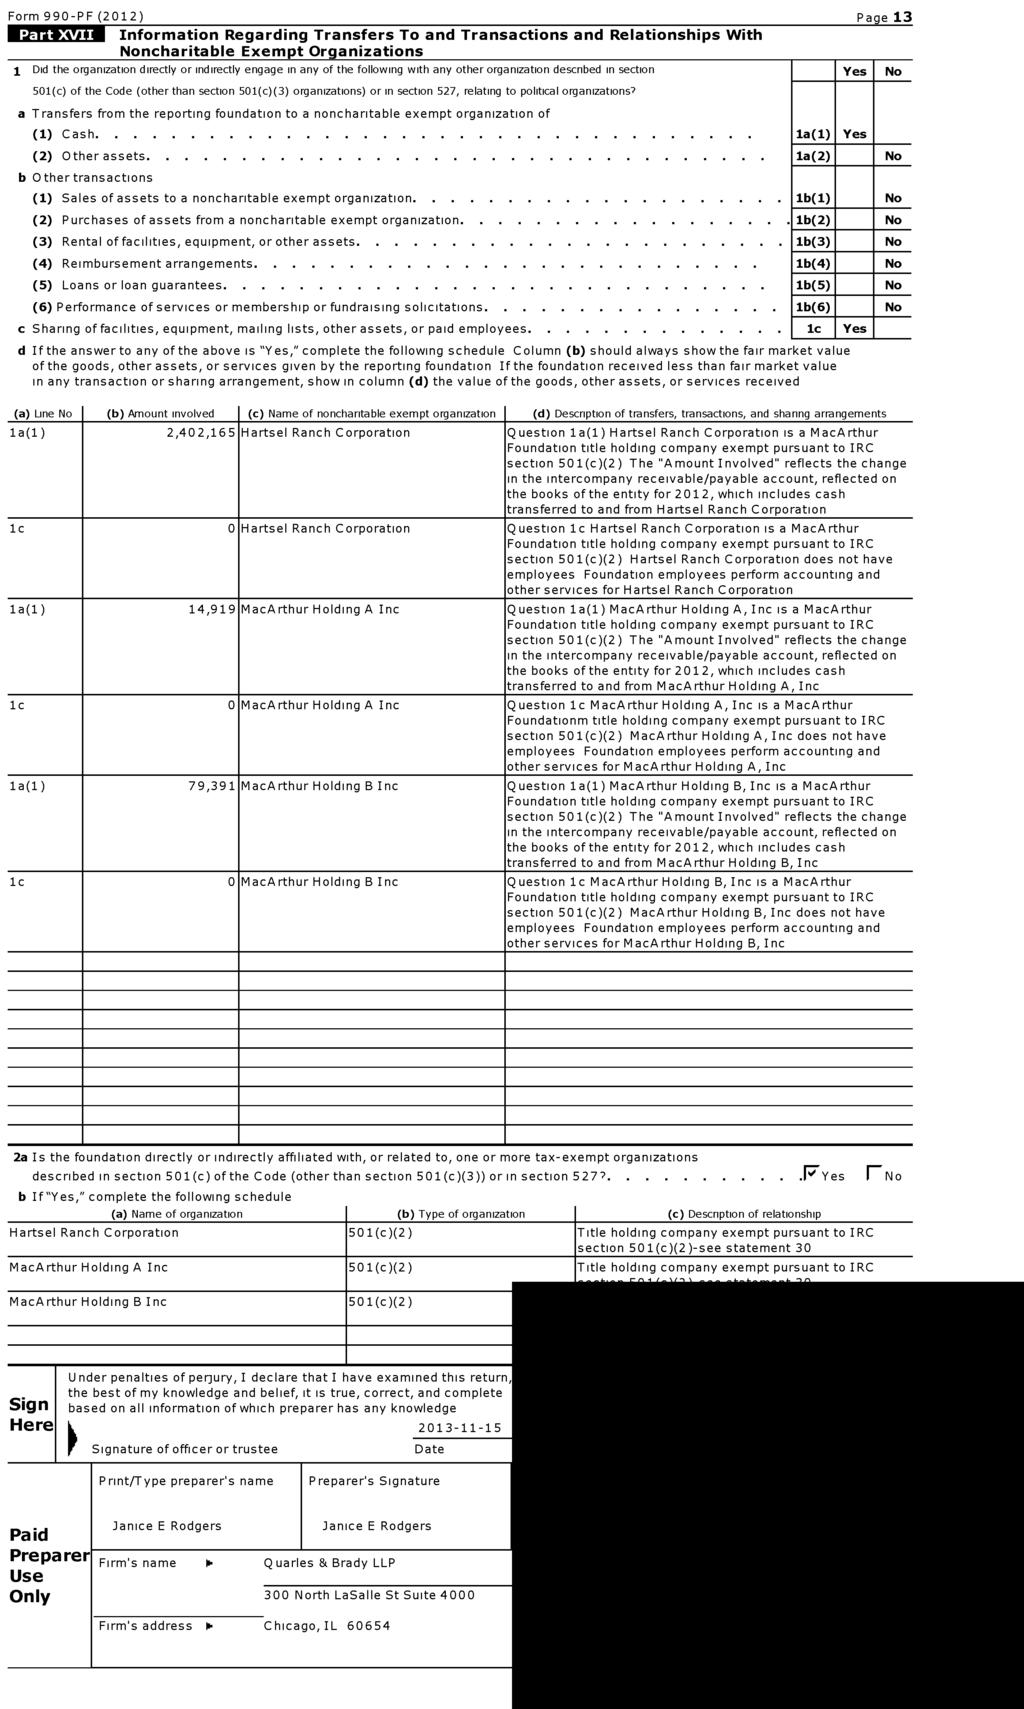 Form 990-PF (2012) Pge 13 Informtion Regrding Trnsfers To nd Trnsctions nd Reltionships With Nonchritble Exempt Orgniztions 1 Did the orgniztion directly or indirectly engge in ny of the following